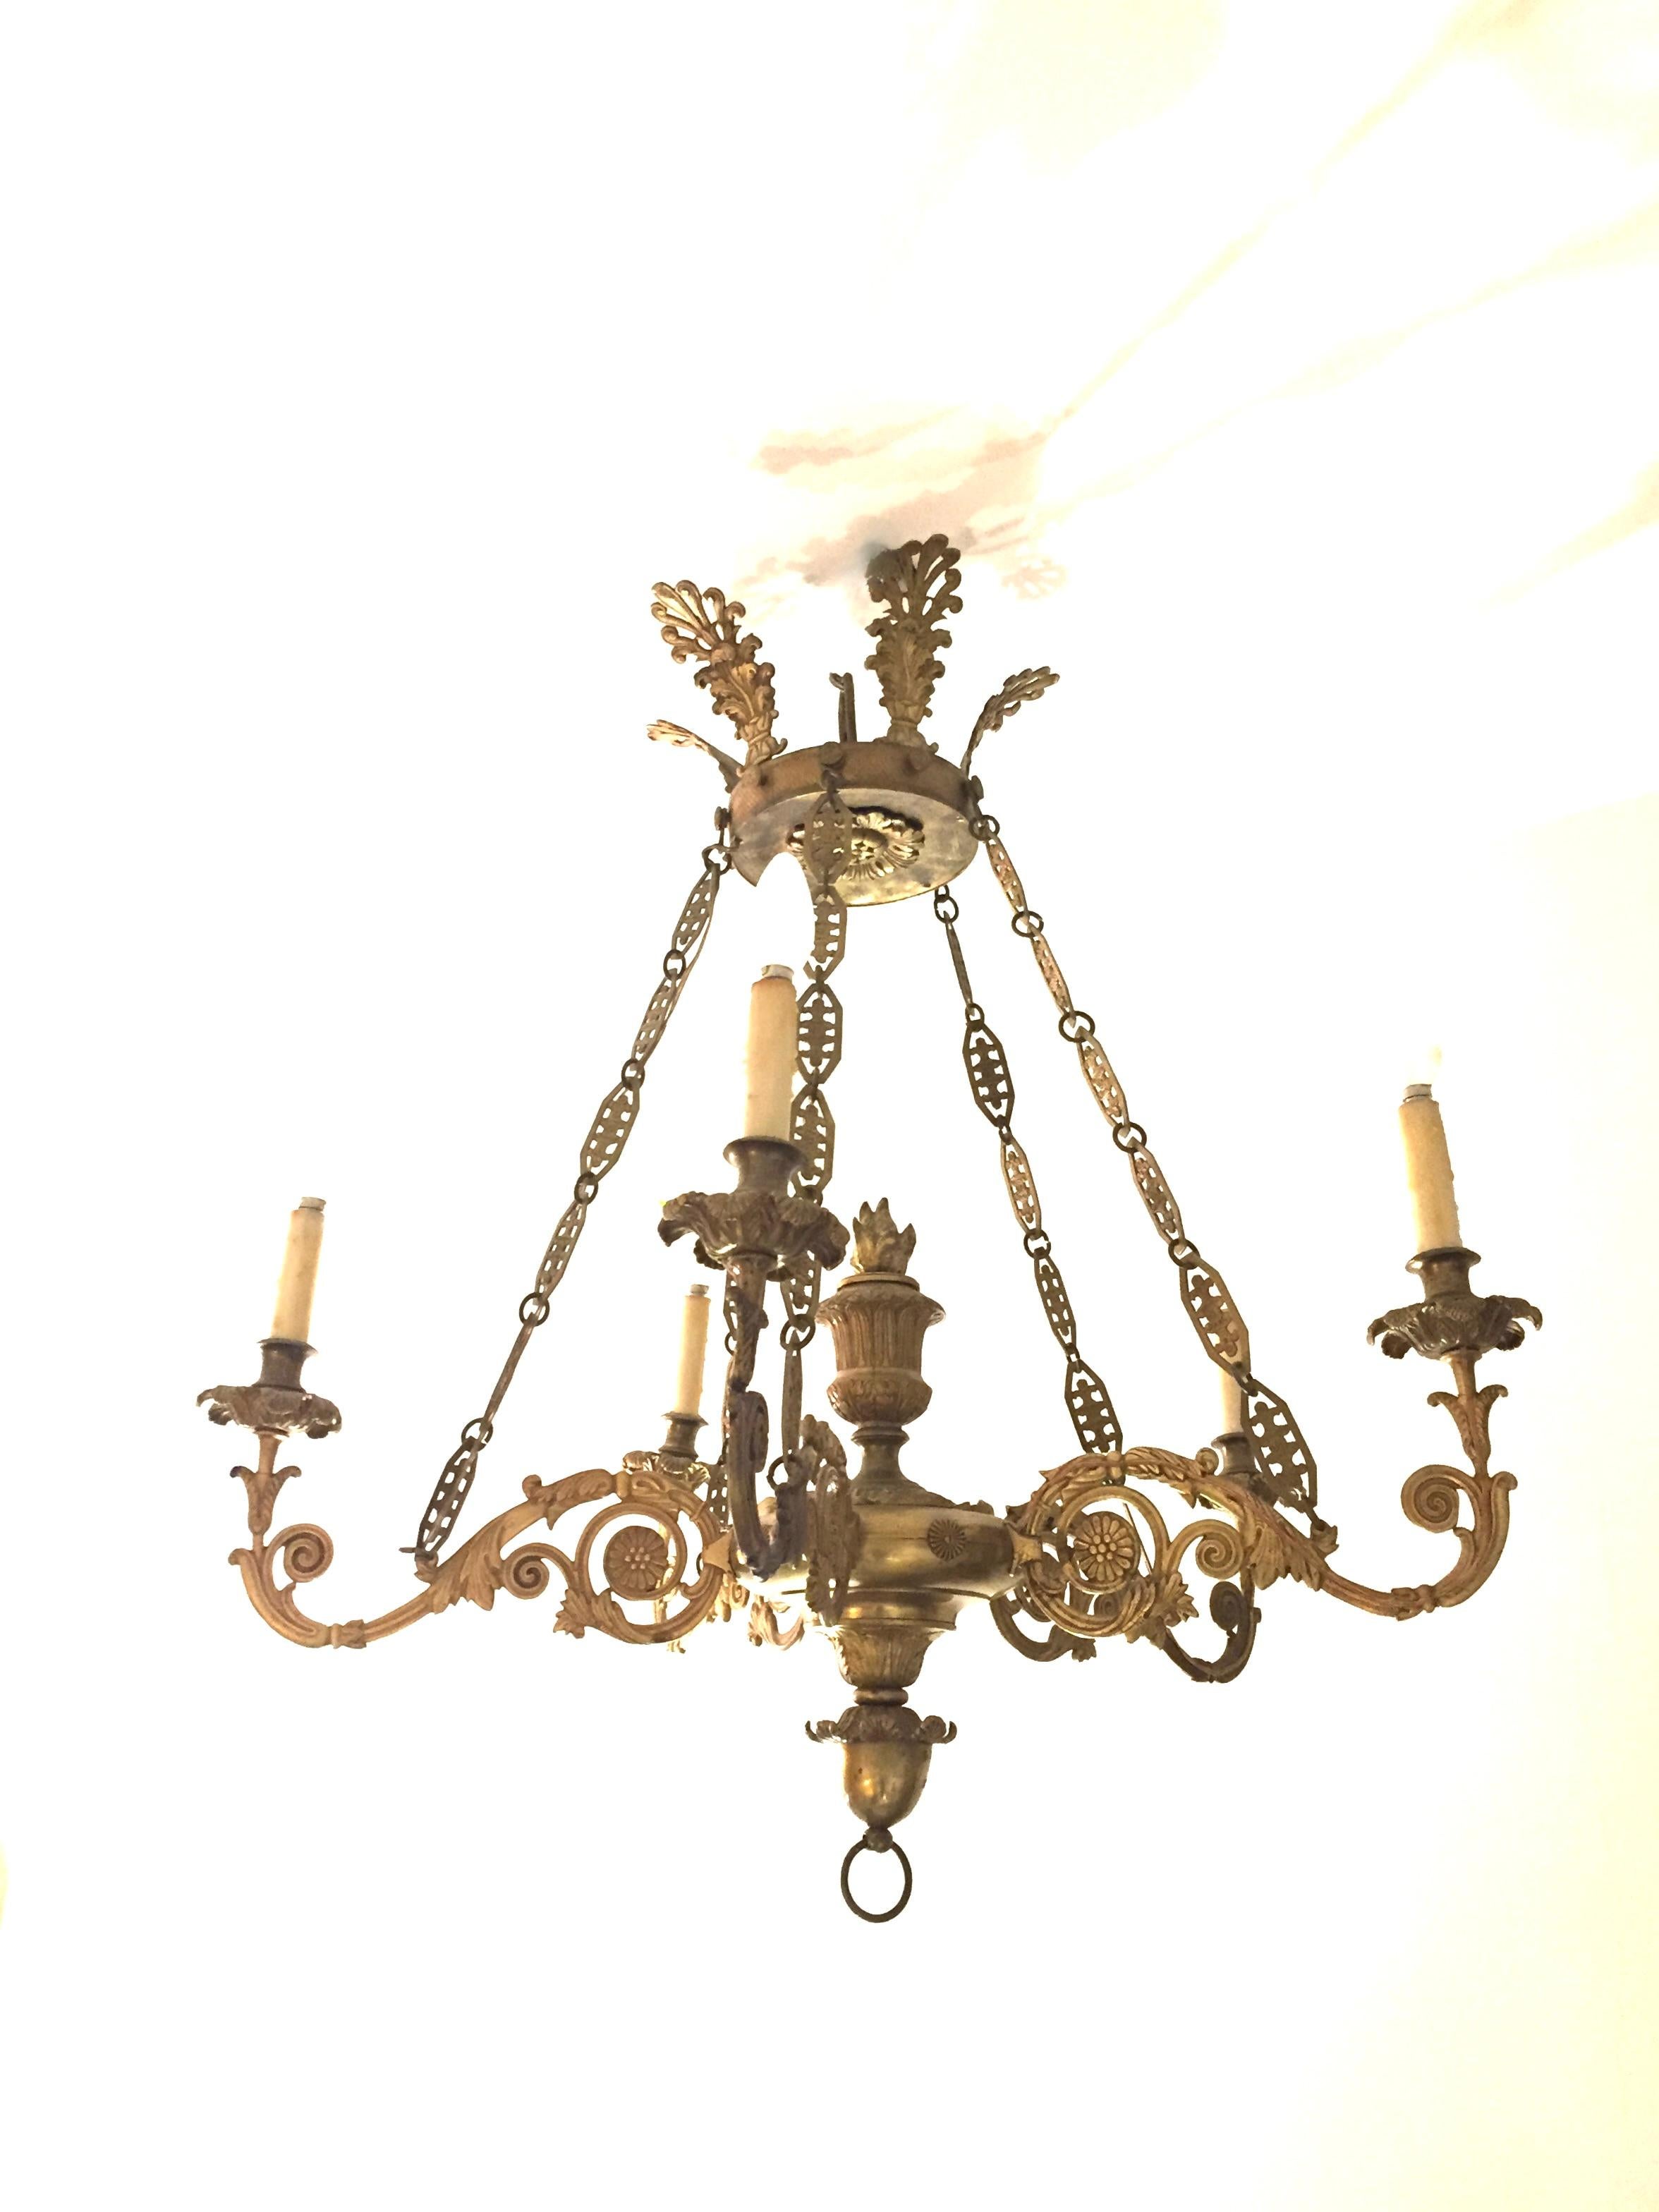 An Original 19th Century Empire bronze chandelier. The piece is beautifully suspended from a palmetto crown by five link chains with a flame center. Five entrenched arms are finished by bronze candle cups and detailed floriate drippers,A heavy